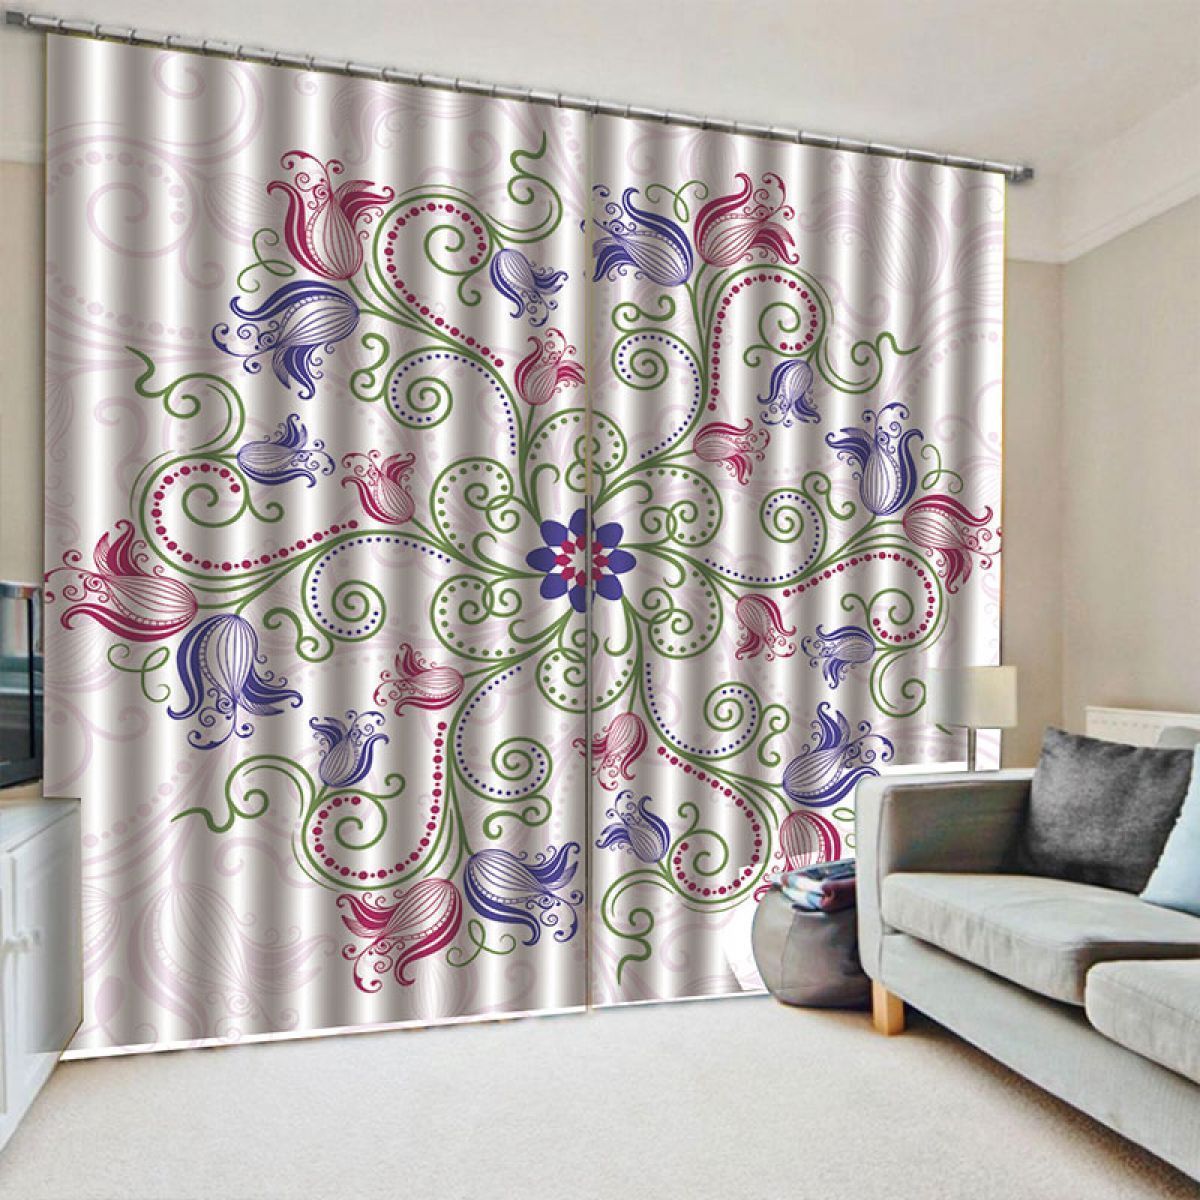 3d floral printed window curtain home decor 2565